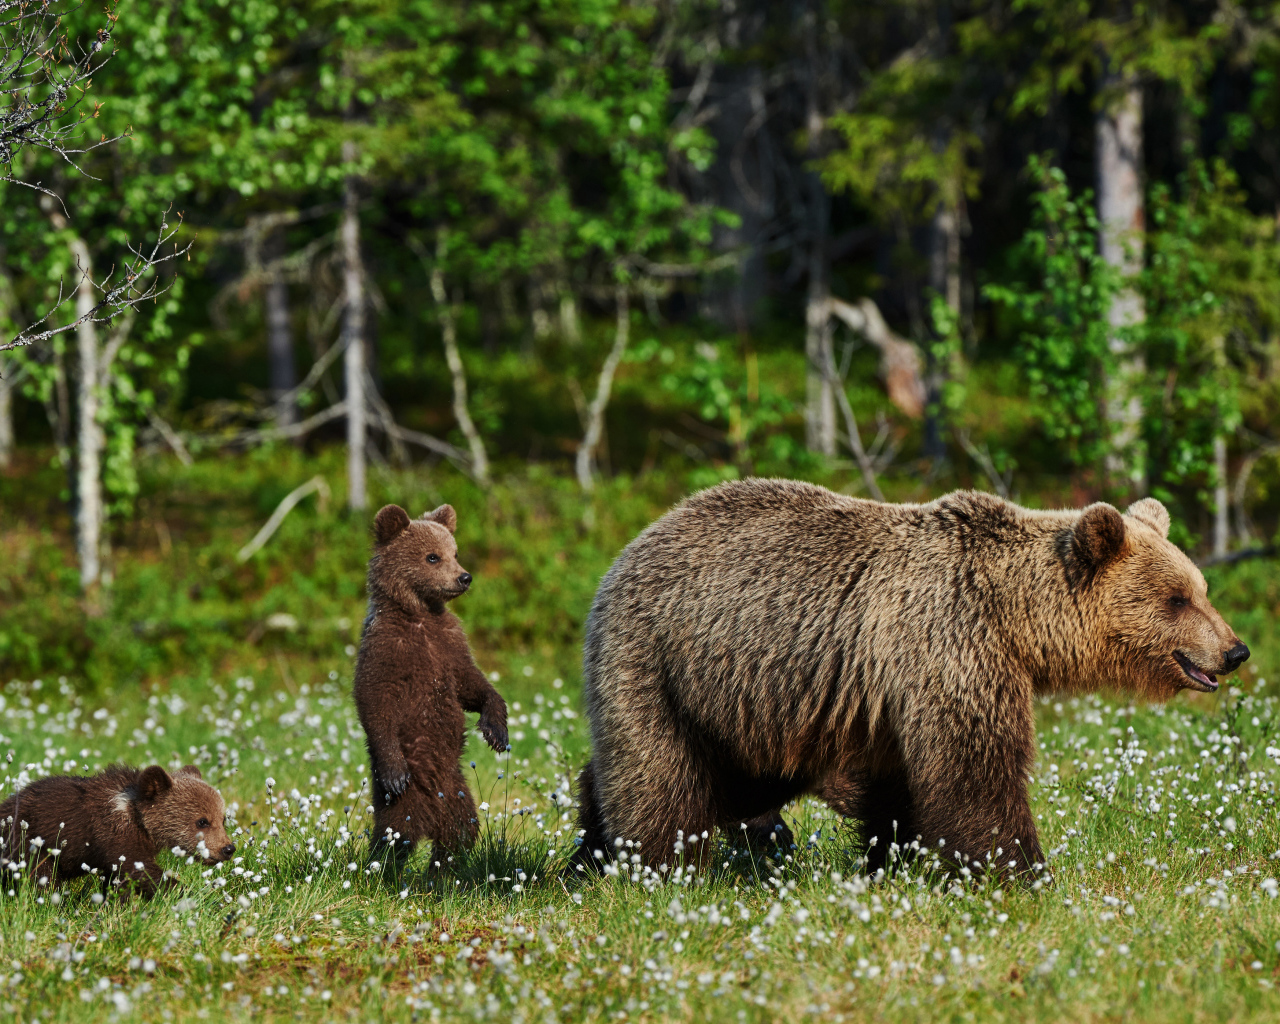 Large brown bear with cubs walking along the green grass